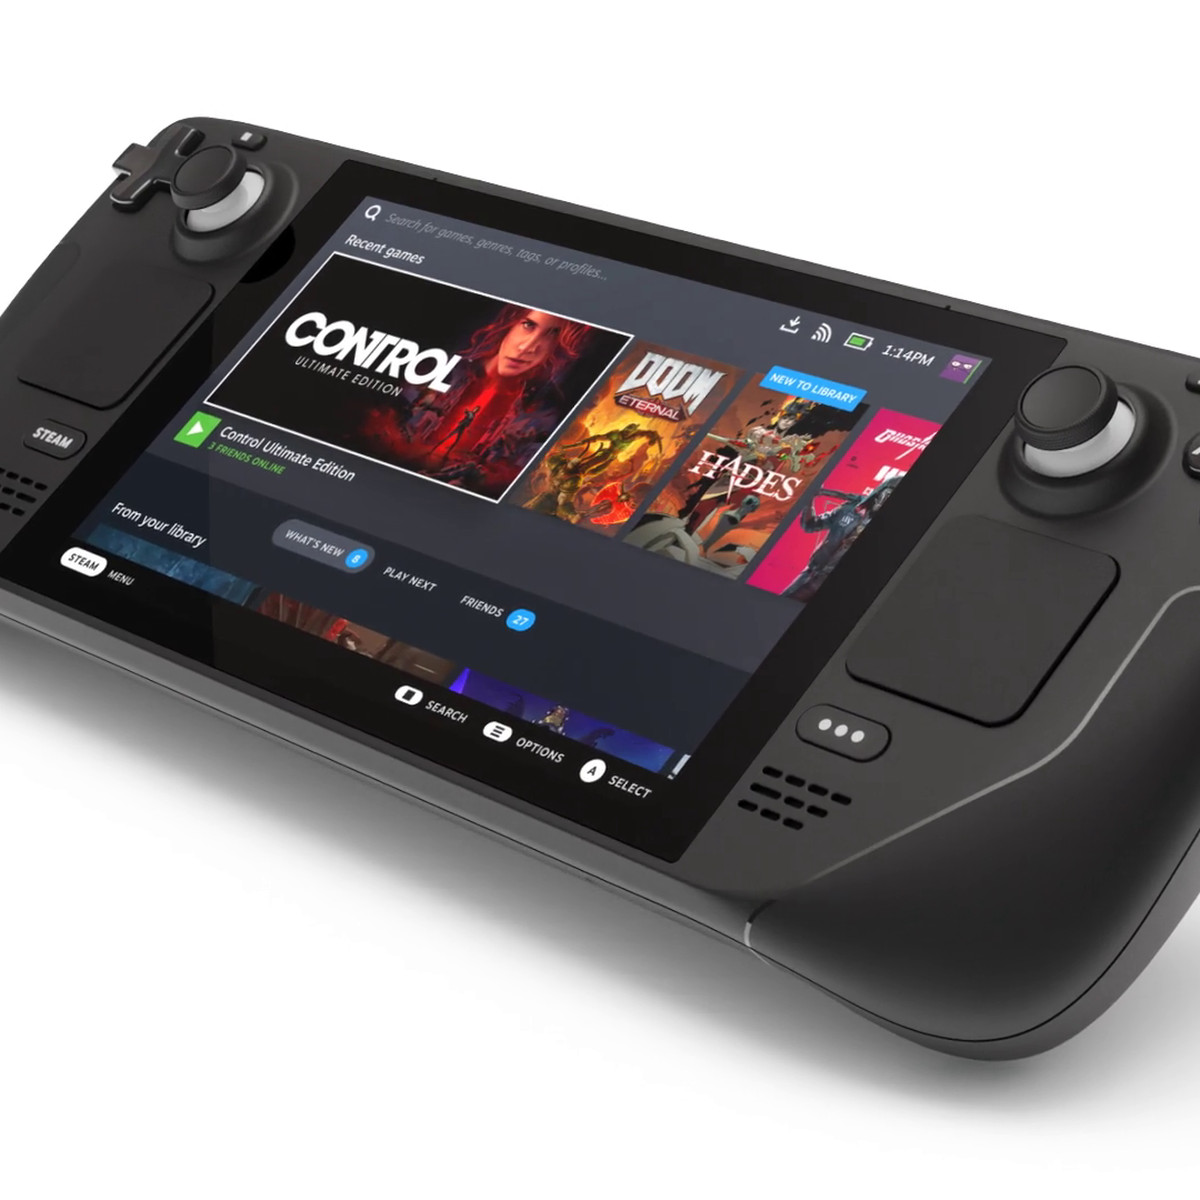 the Steam Deck, a gaming handheld from Valve